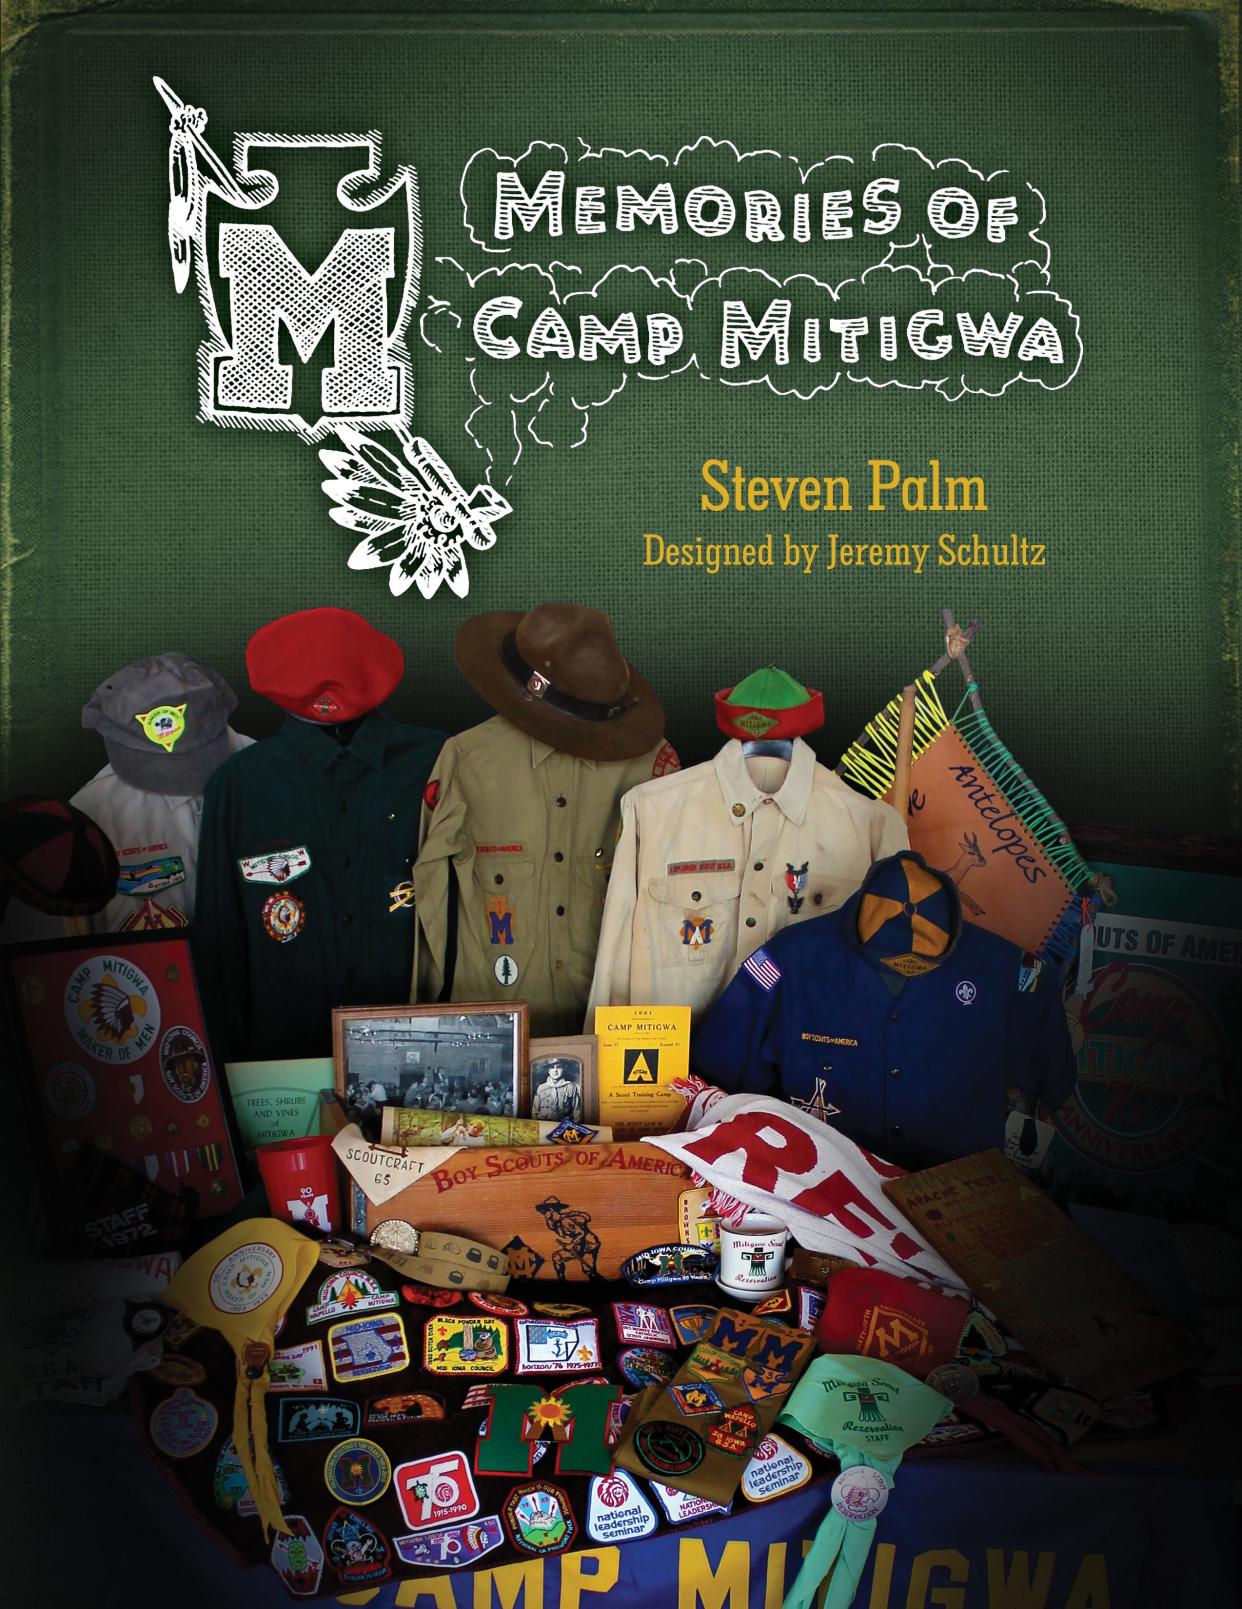 A new book “Memories of Camp Mitigwa” chronicles the story of the camp, which is located across the river from the Iowa Arboretum in rural Boone County.